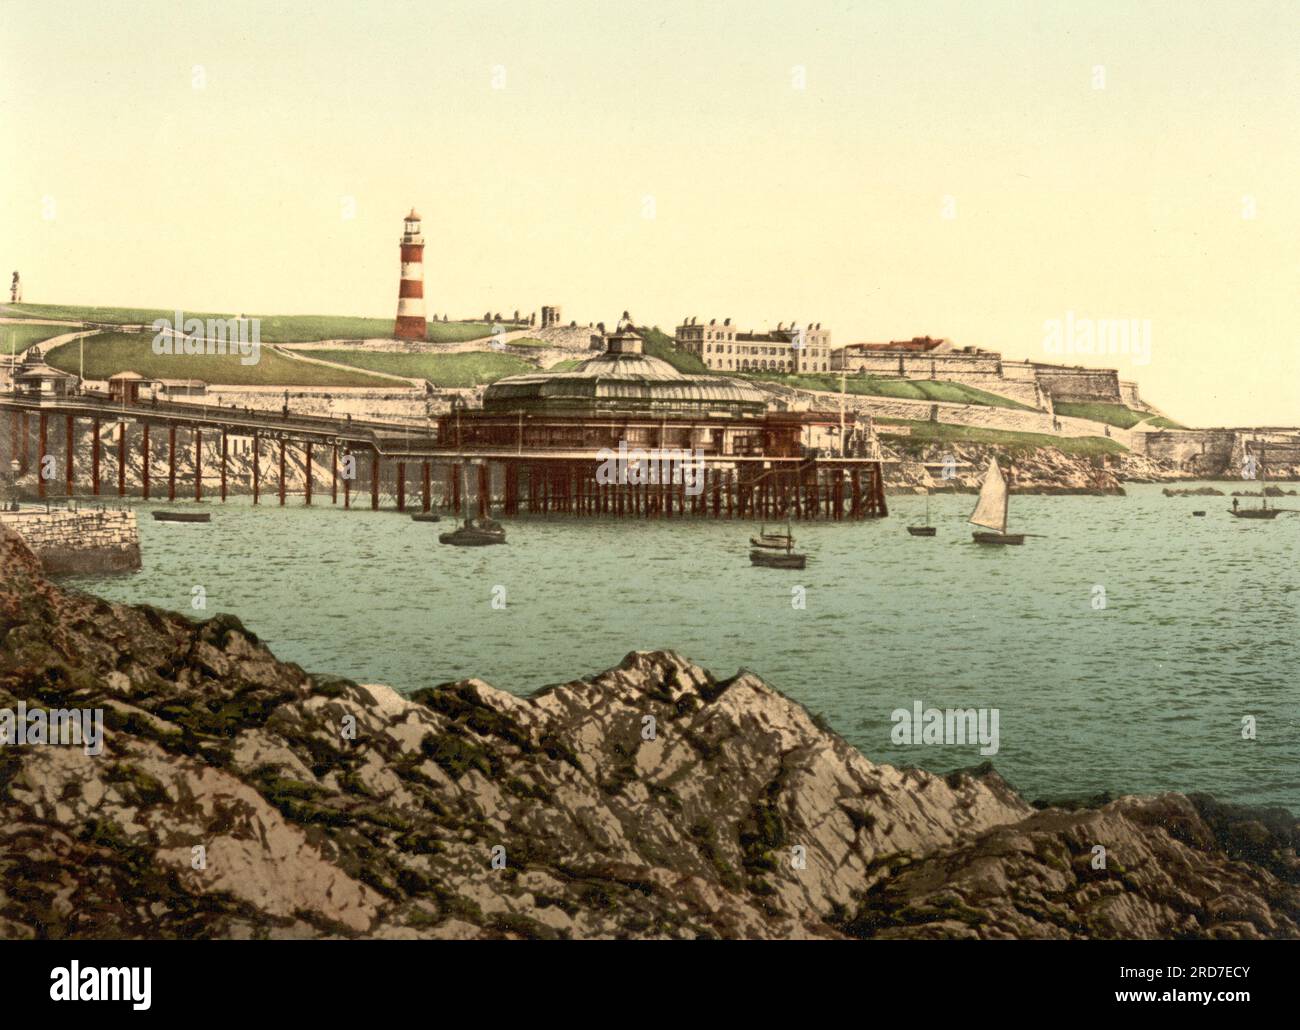 The Hoe, from the Rusty Anchor, Plymouth, port city and unitary authority in South West England, England, 1895, Historical, digital improved reproduction of an old Photochrome print Stock Photo